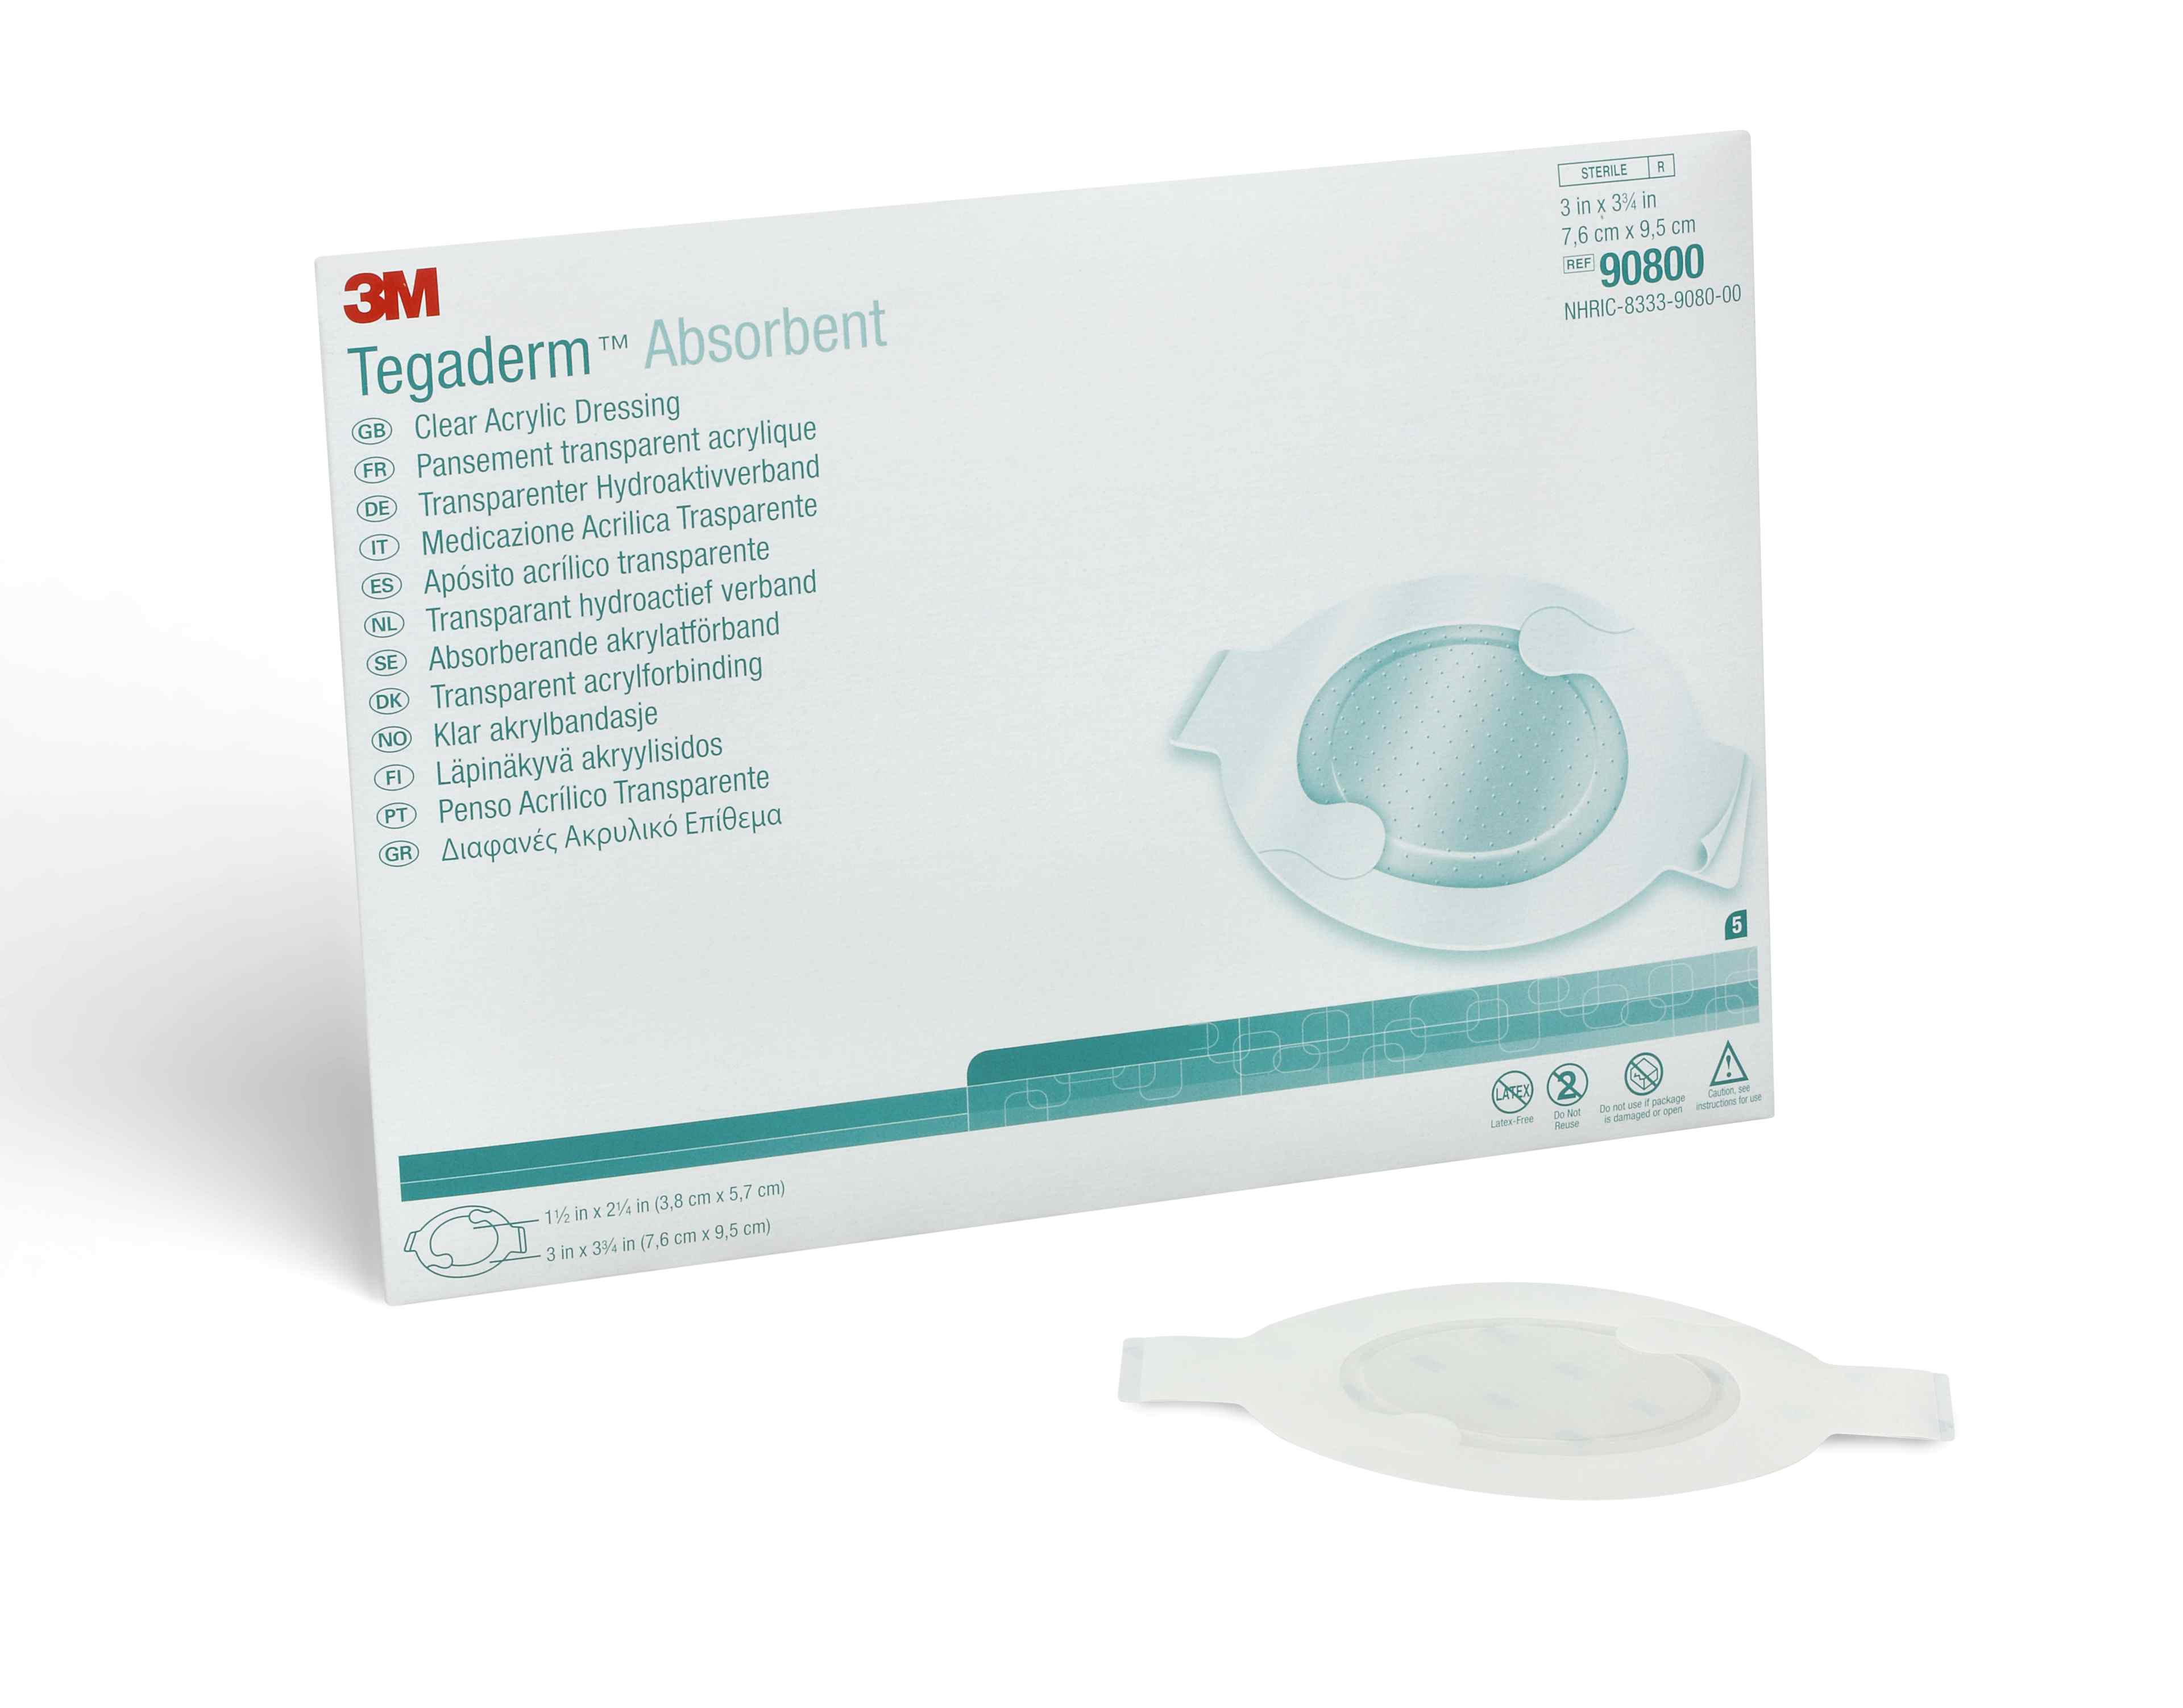 3M Tegaderm Absorbent Clear Acrylic Dressing, 3 X 3-1/4"